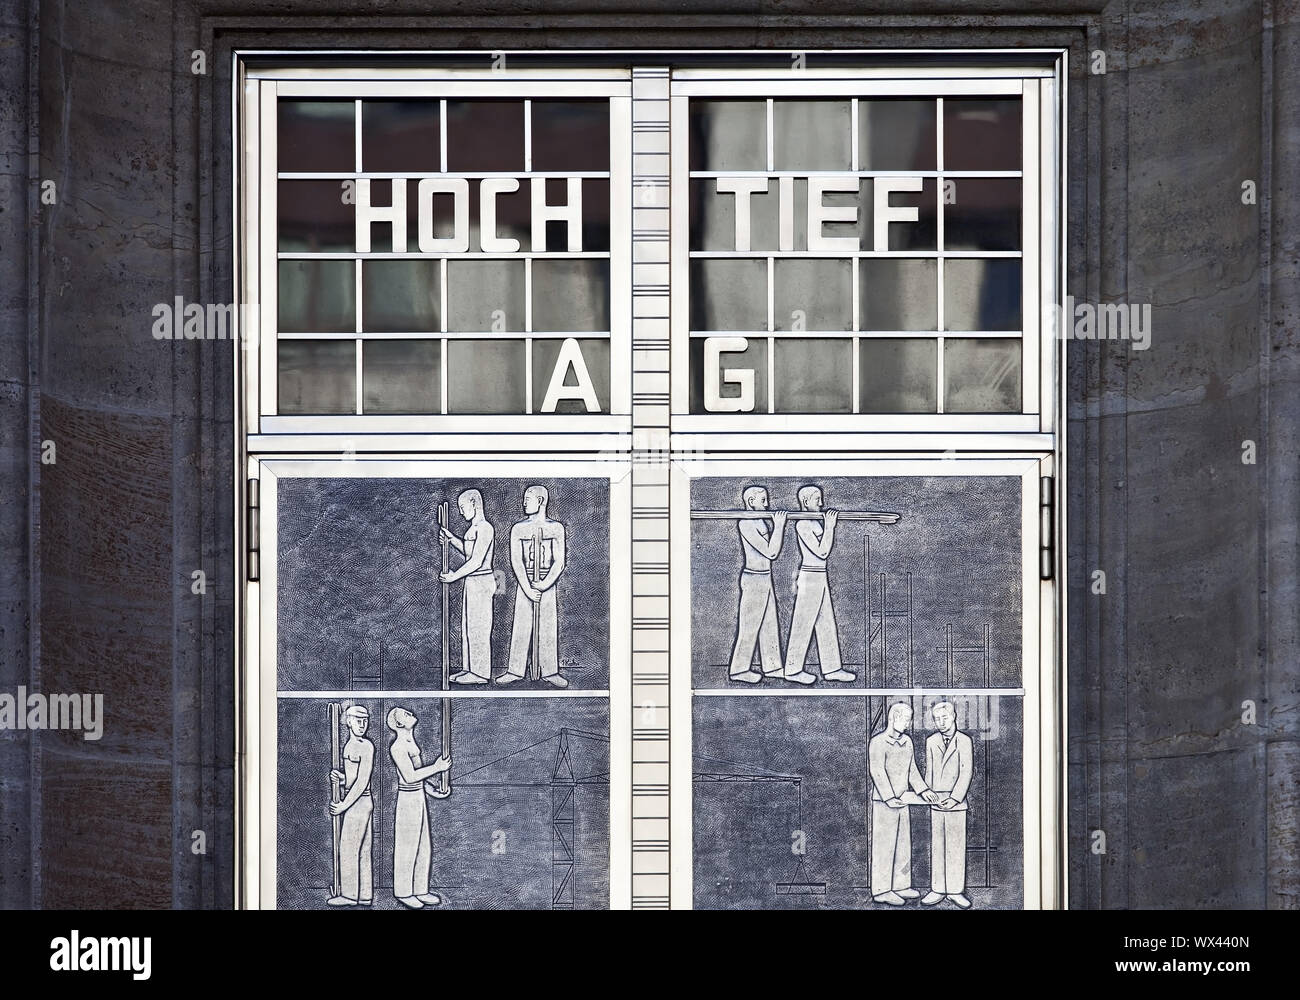 Hochtief, historical entrance to the company headquarters, Hochtiefhaus, Essen, Germany, Europe Stock Photo